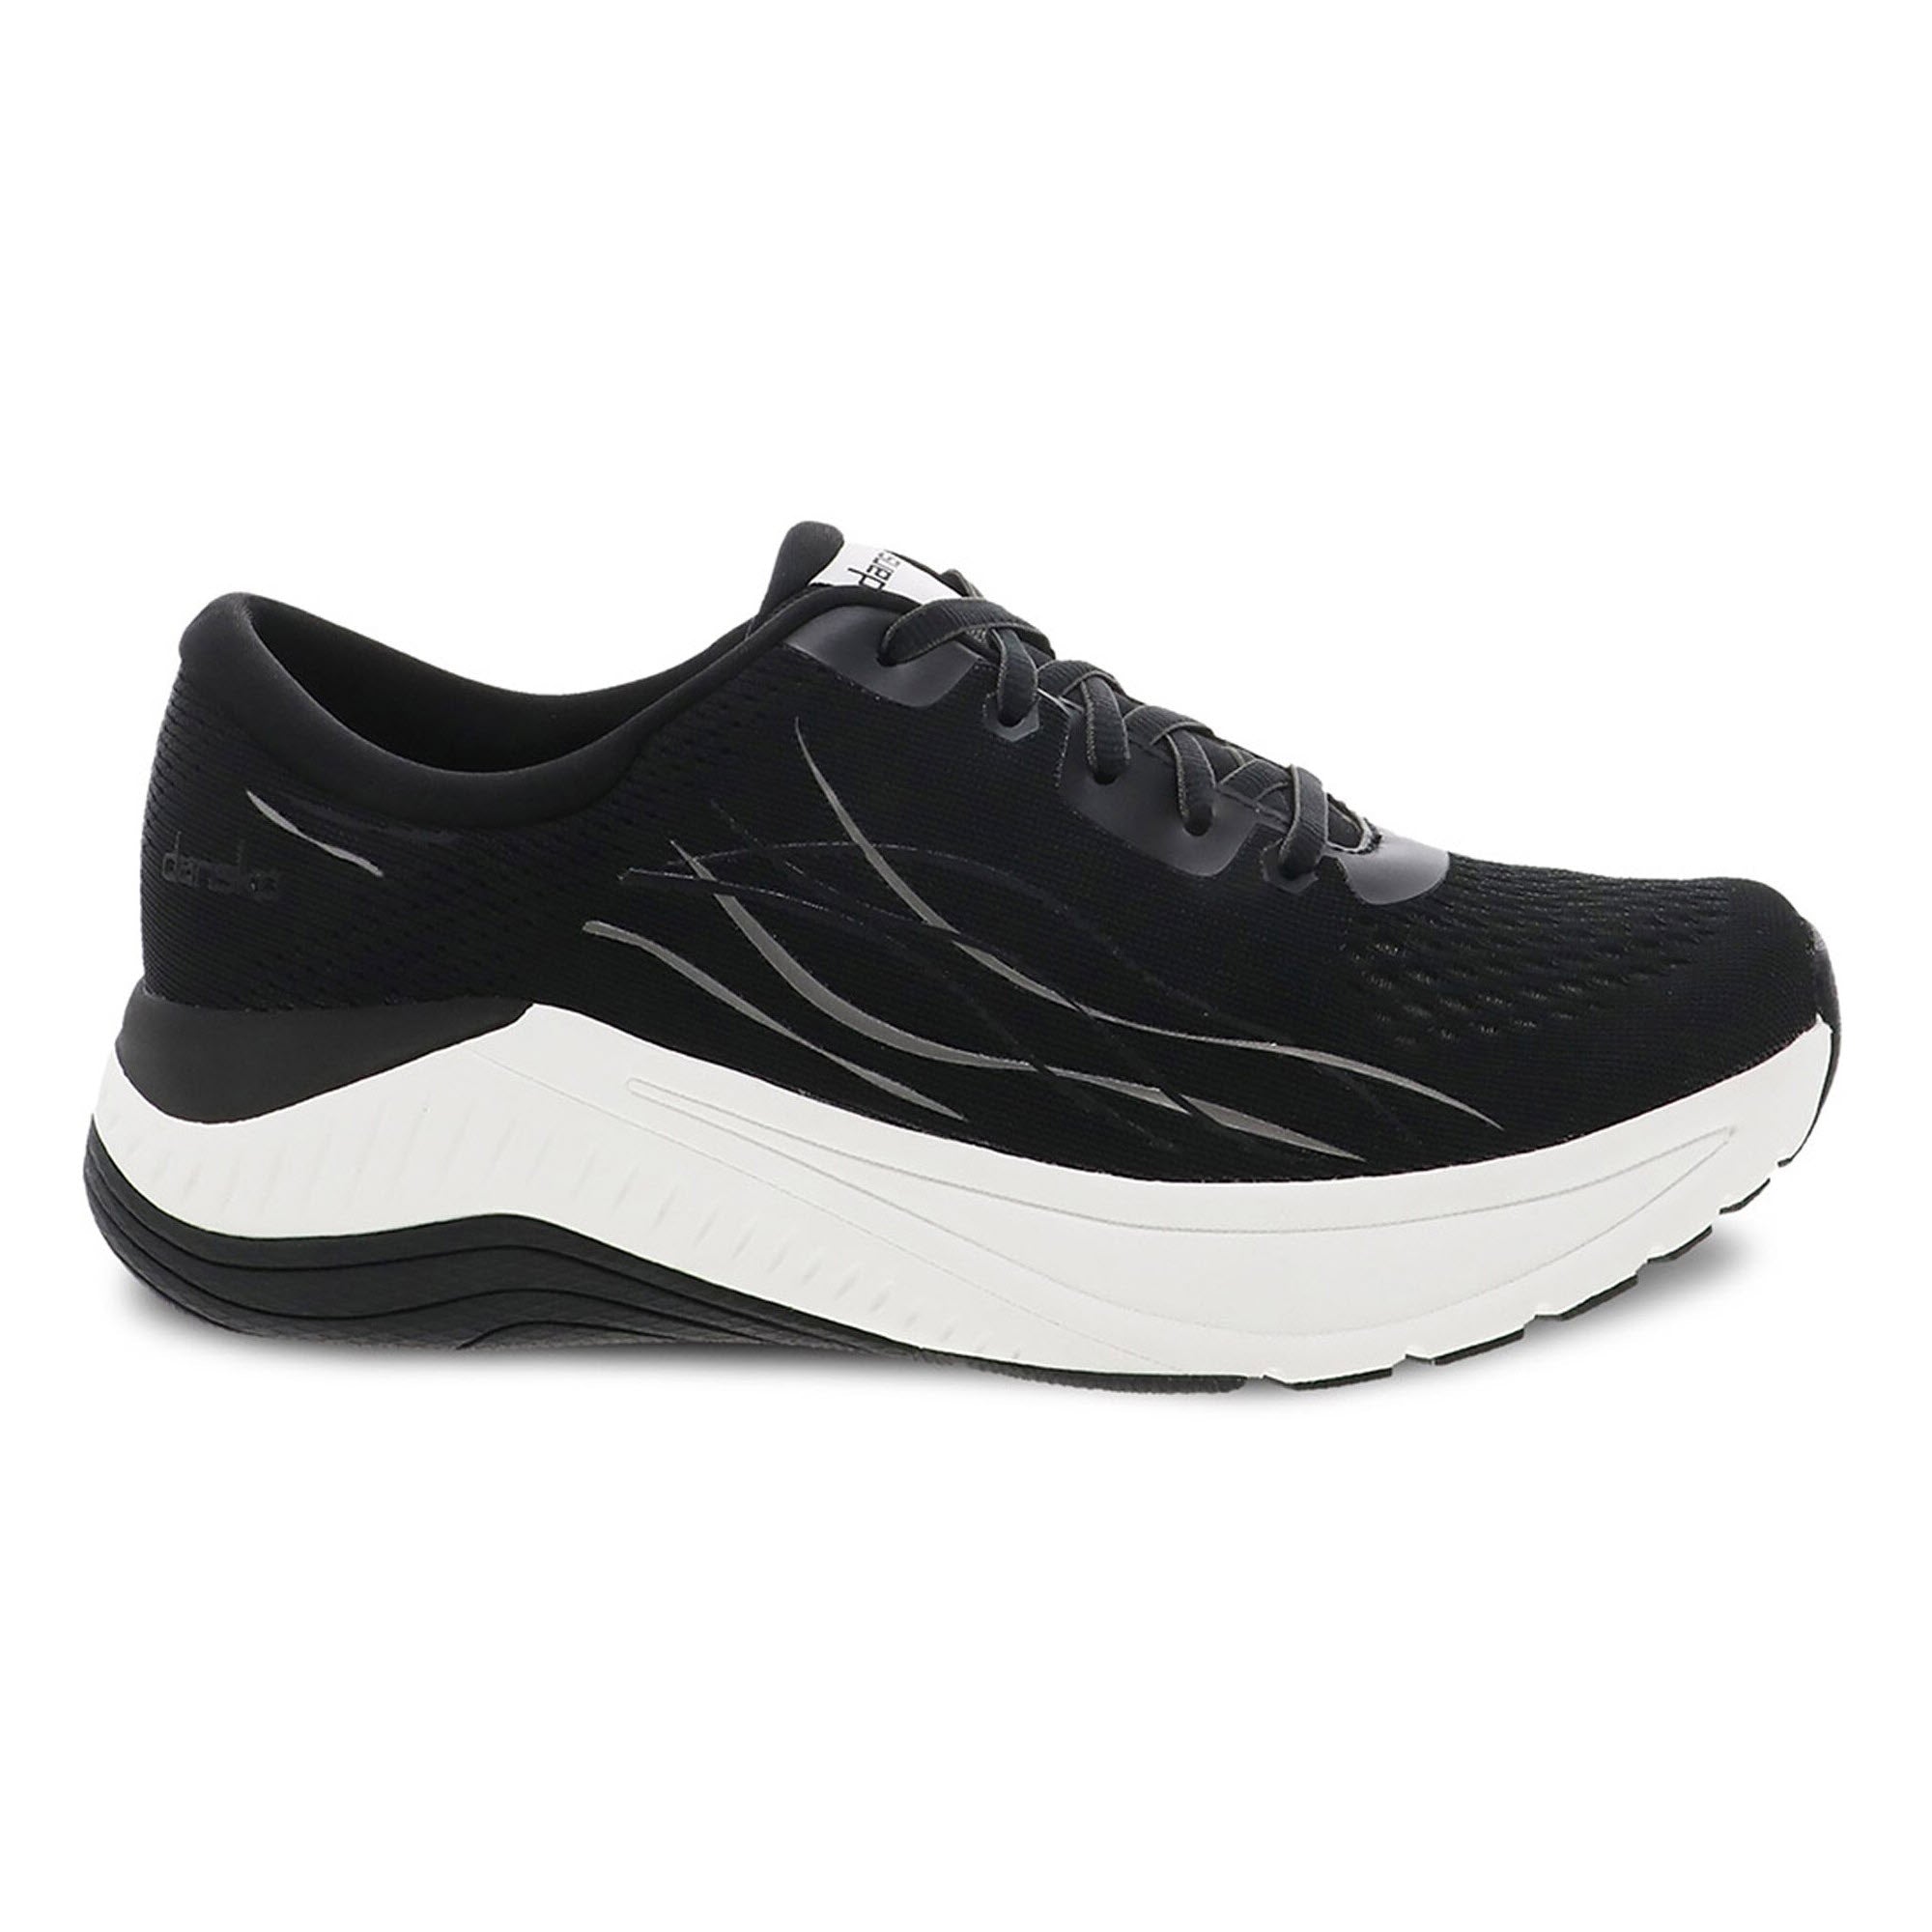 A single Dansko Pace Black Mesh walking shoe, in black and white, on a white background.